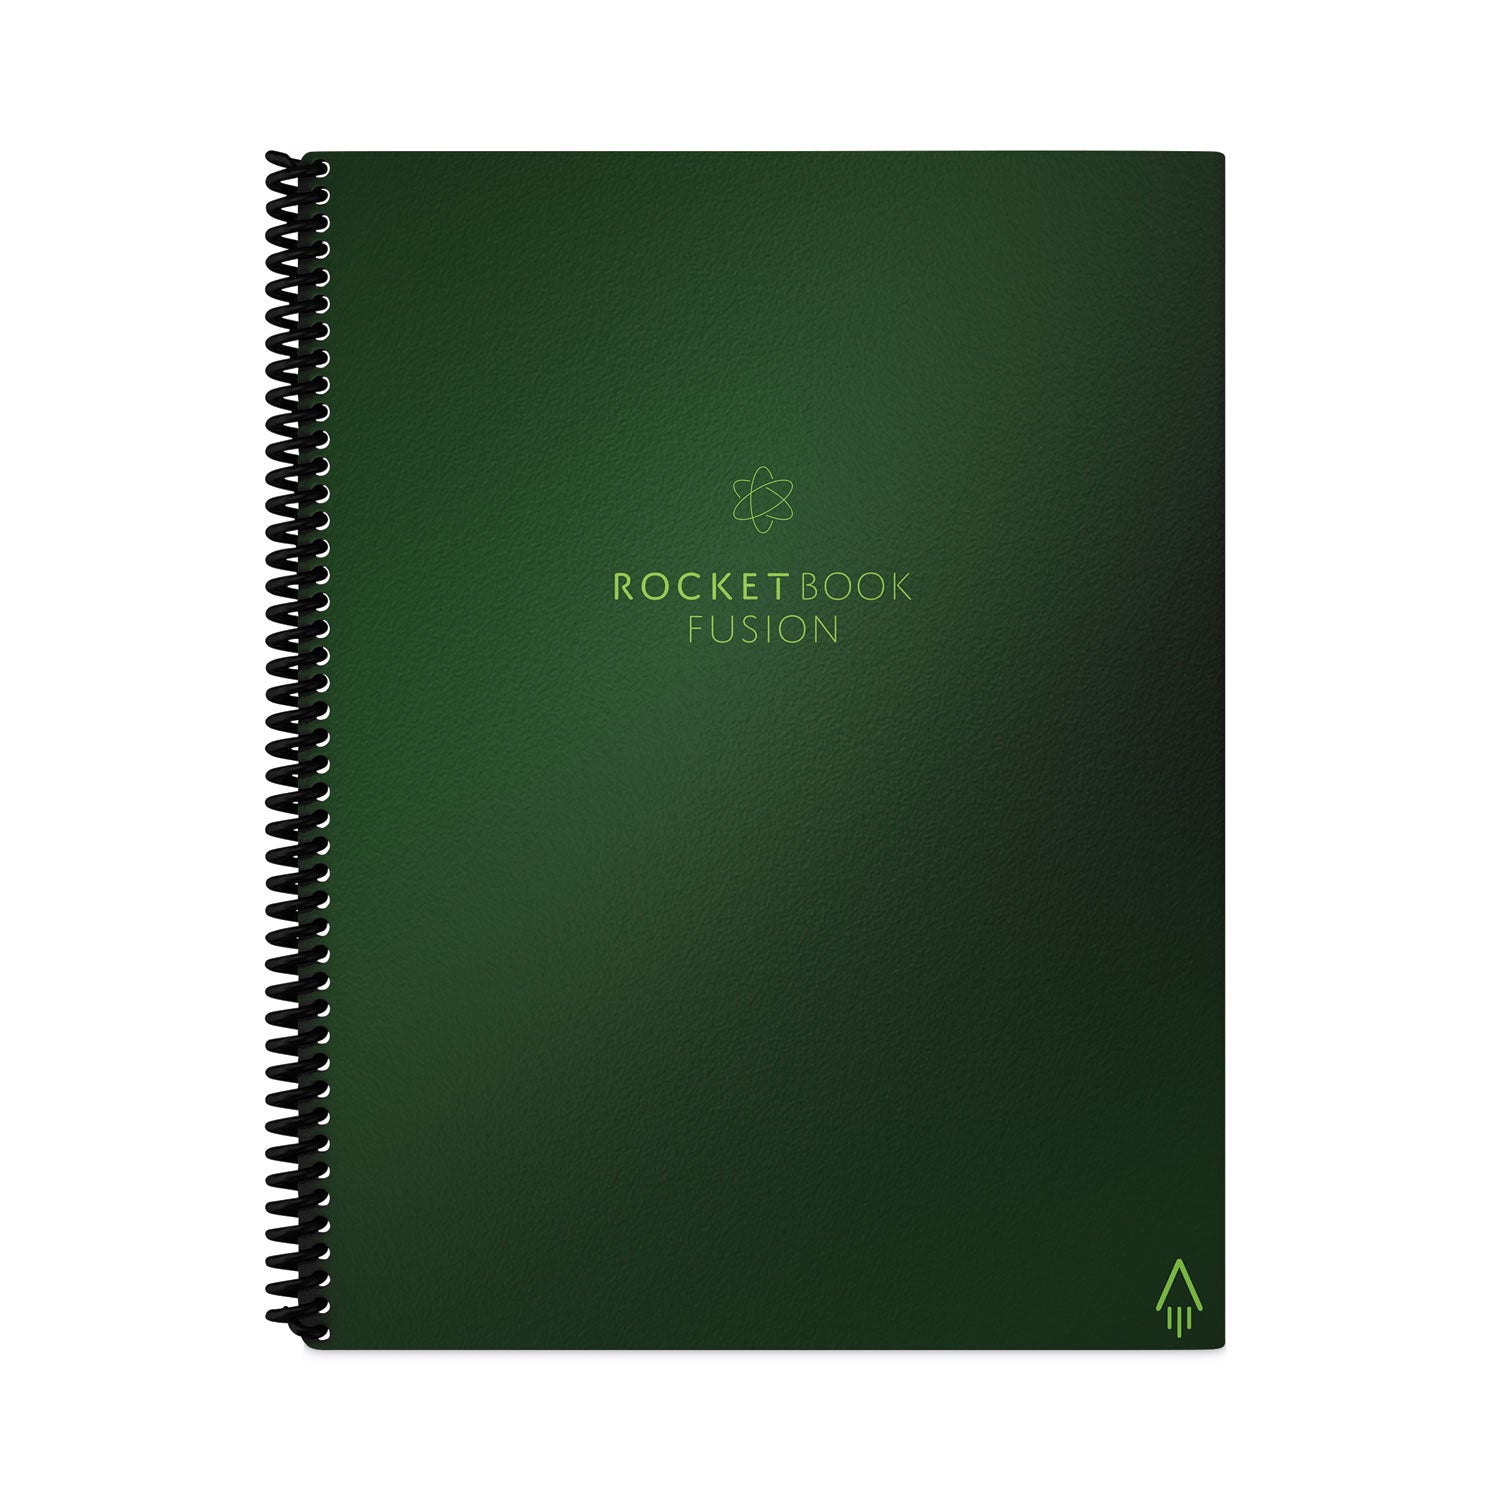 fusion-smart-notebook-seven-assorted-page-formats-terrestrial-green-cover-21-11-x-85-sheets_rkbevrflrcckgfr - 2